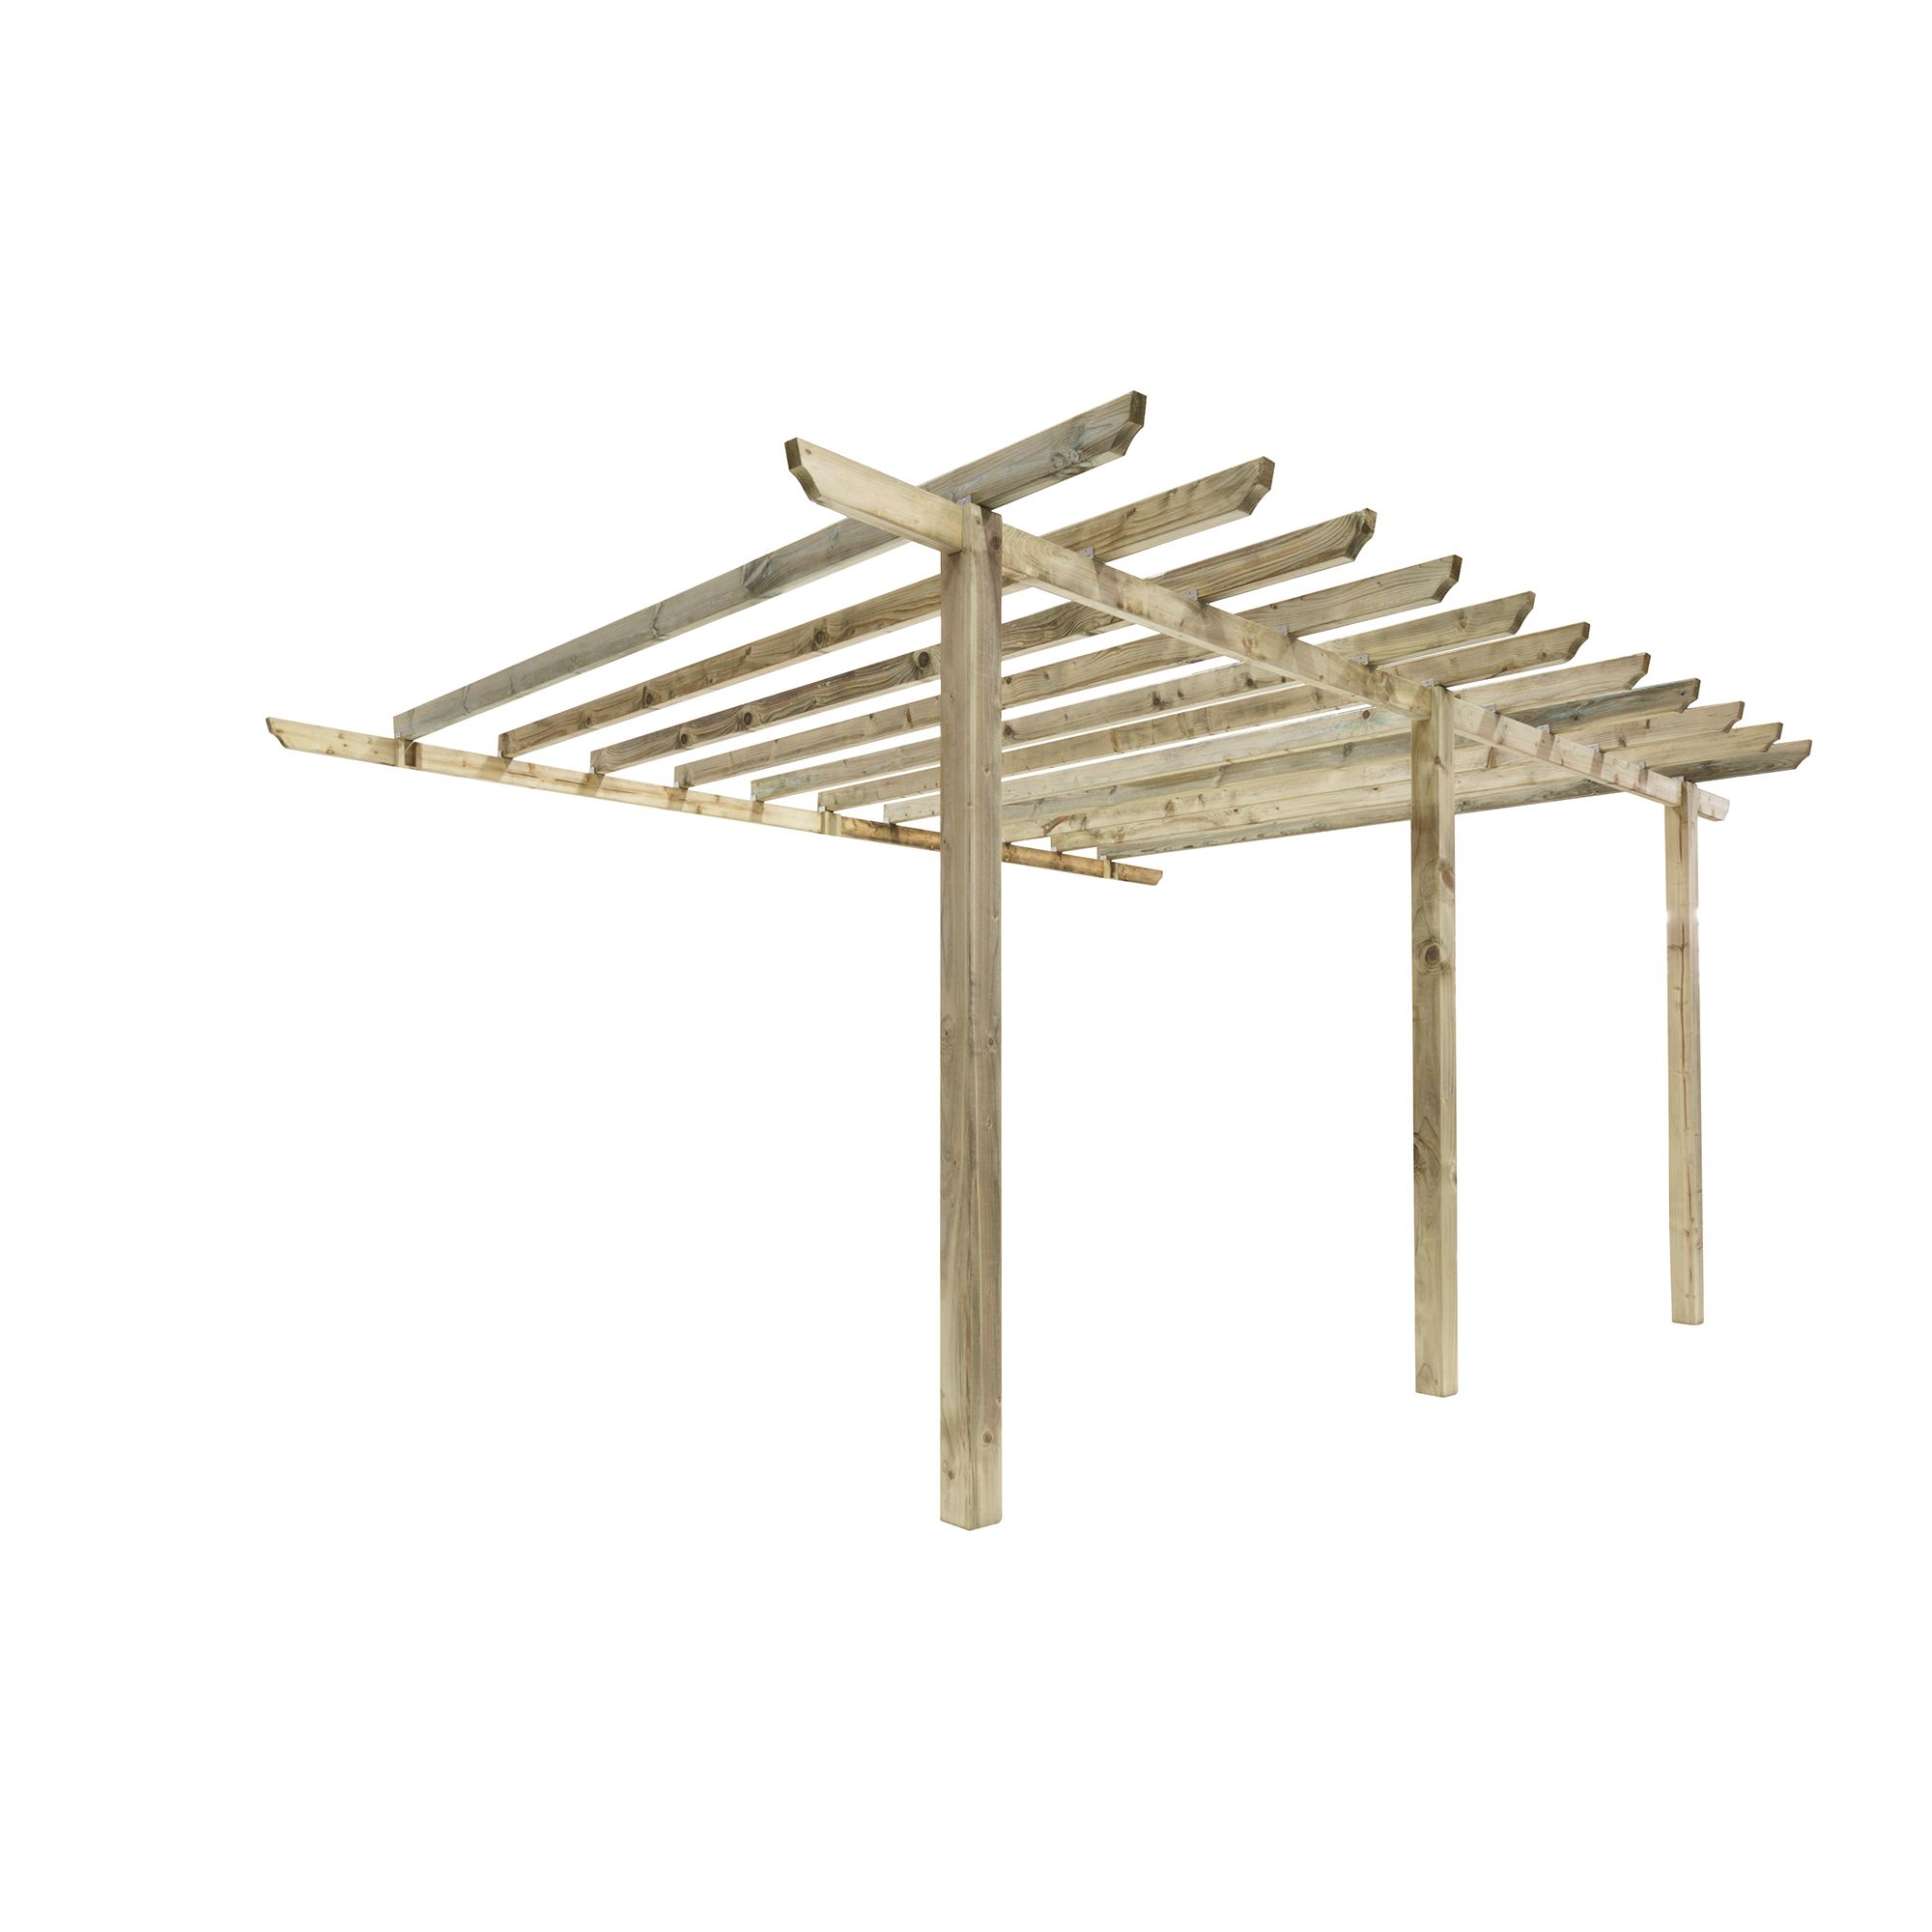 Finsbury Lean-to Pergola - Includes Spikes for soft ground at Tesco Direct